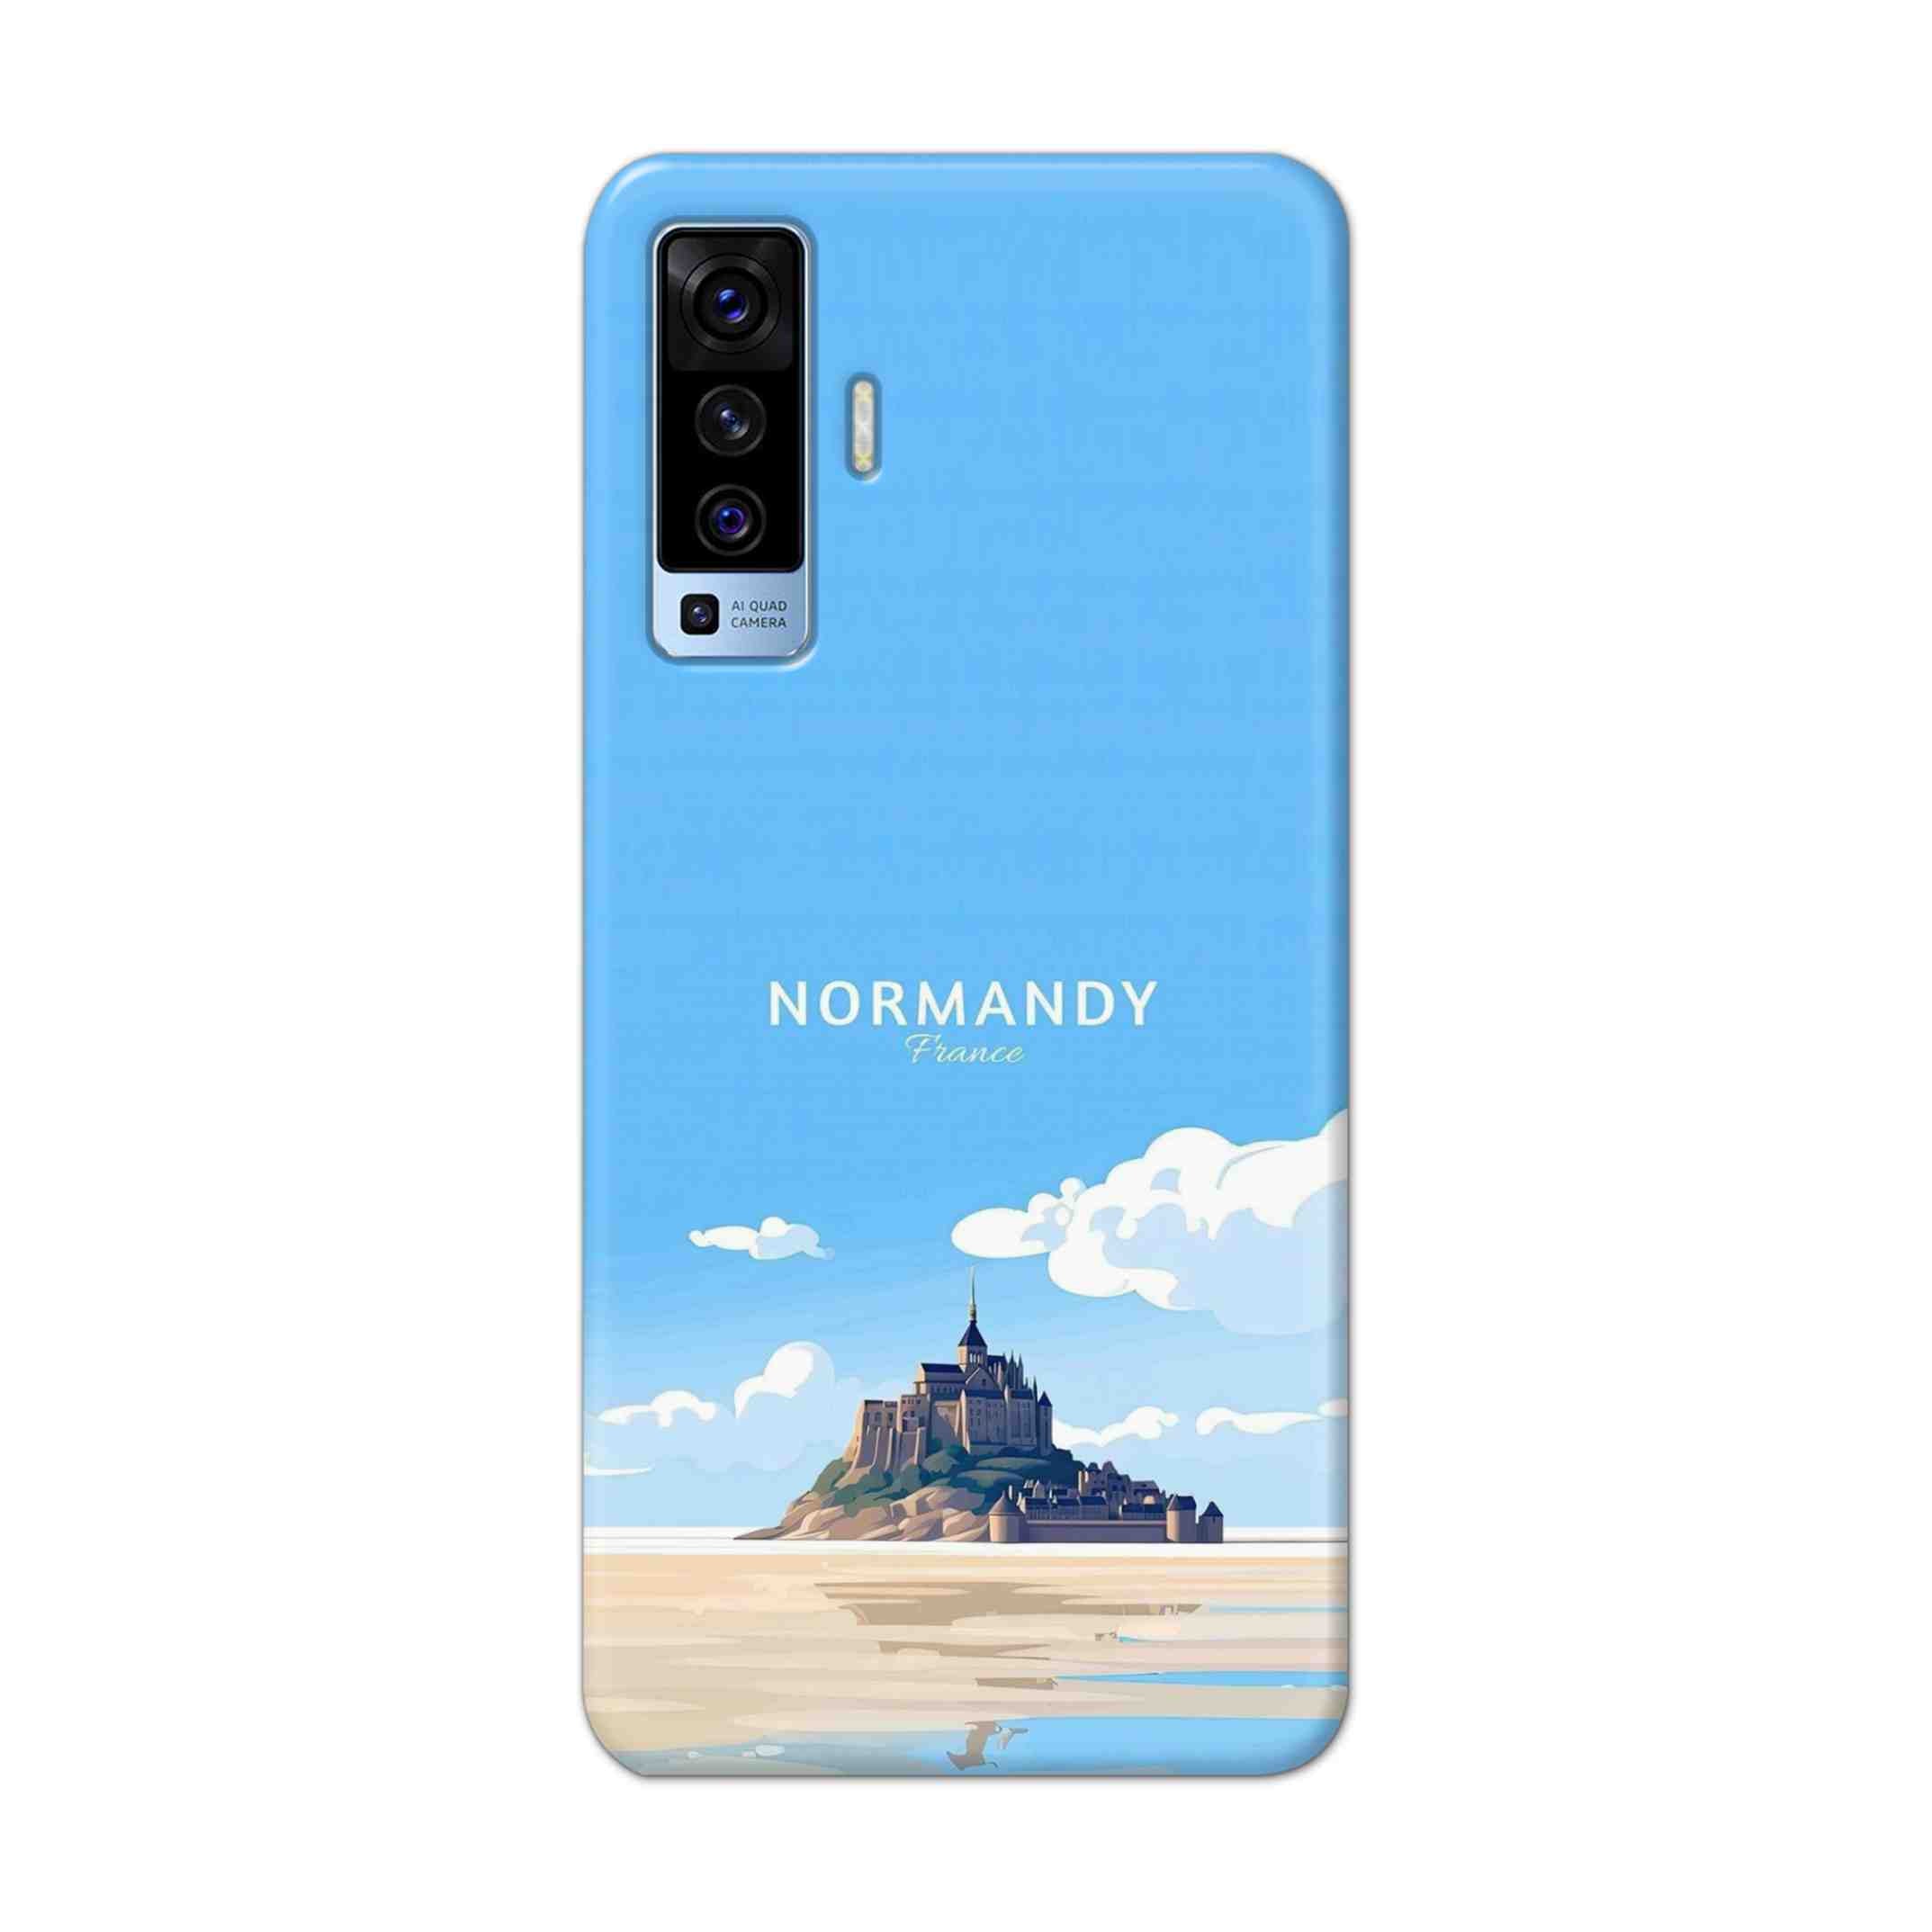 Buy Normandy Hard Back Mobile Phone Case Cover For Vivo X50 Online